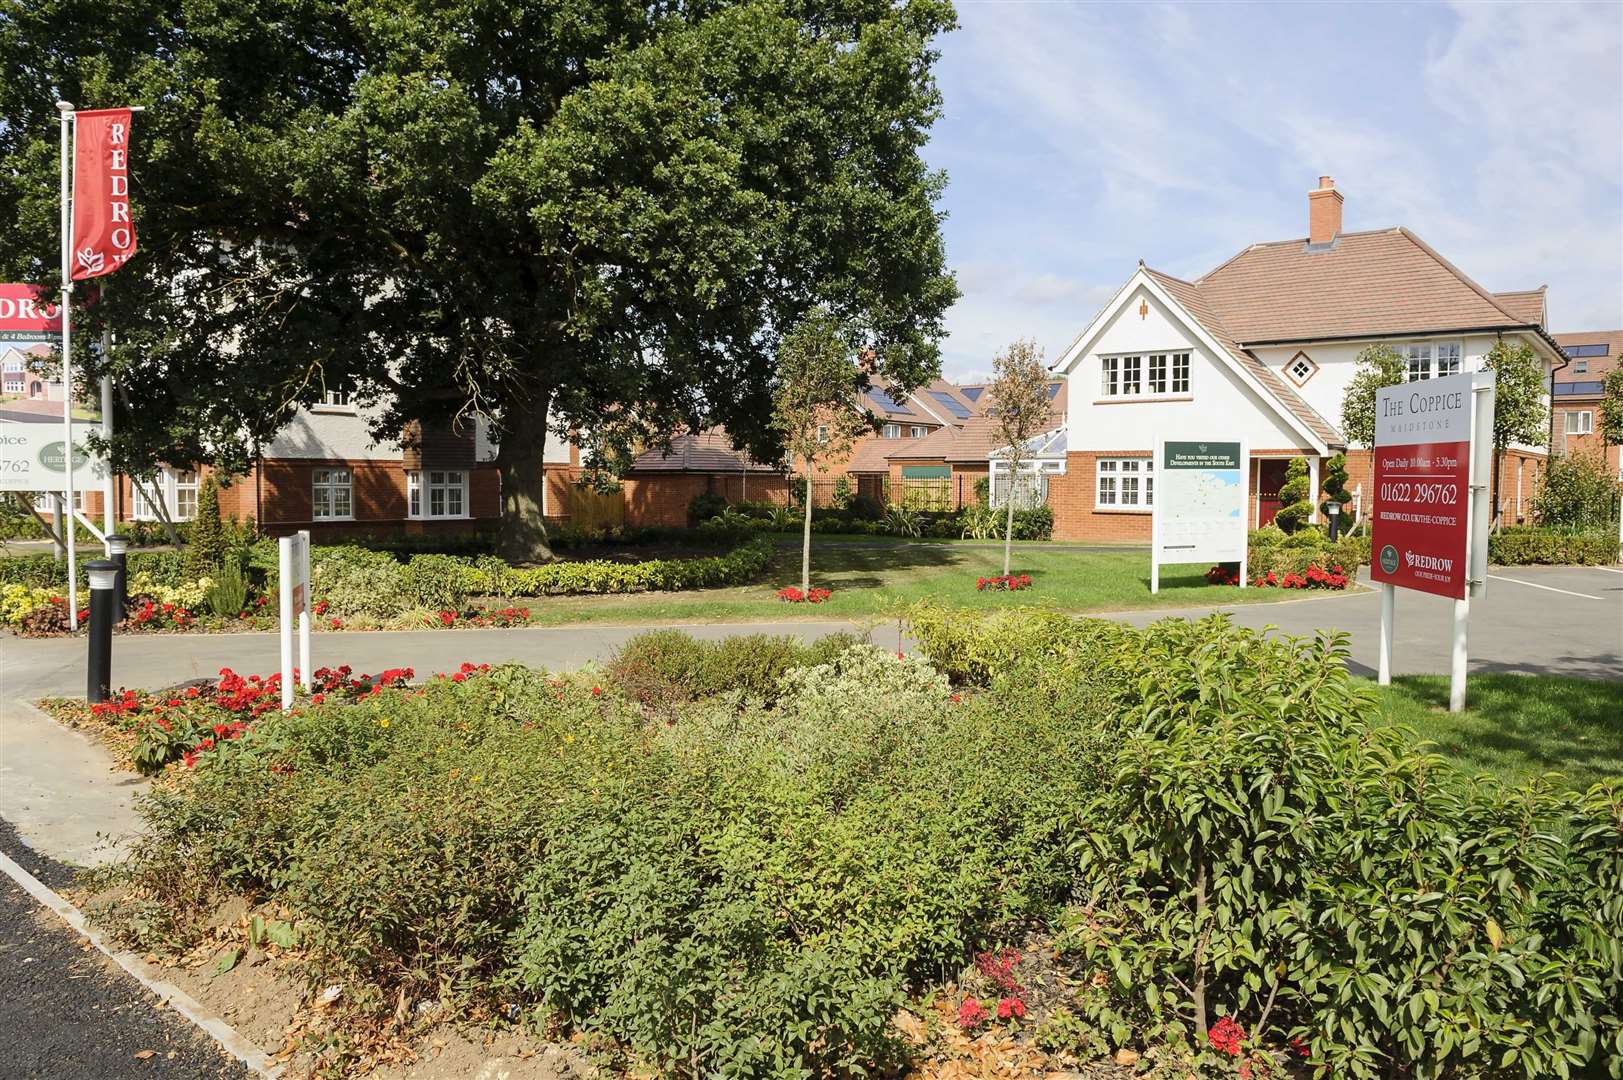 Redrow has housing developments across the county and nationwide